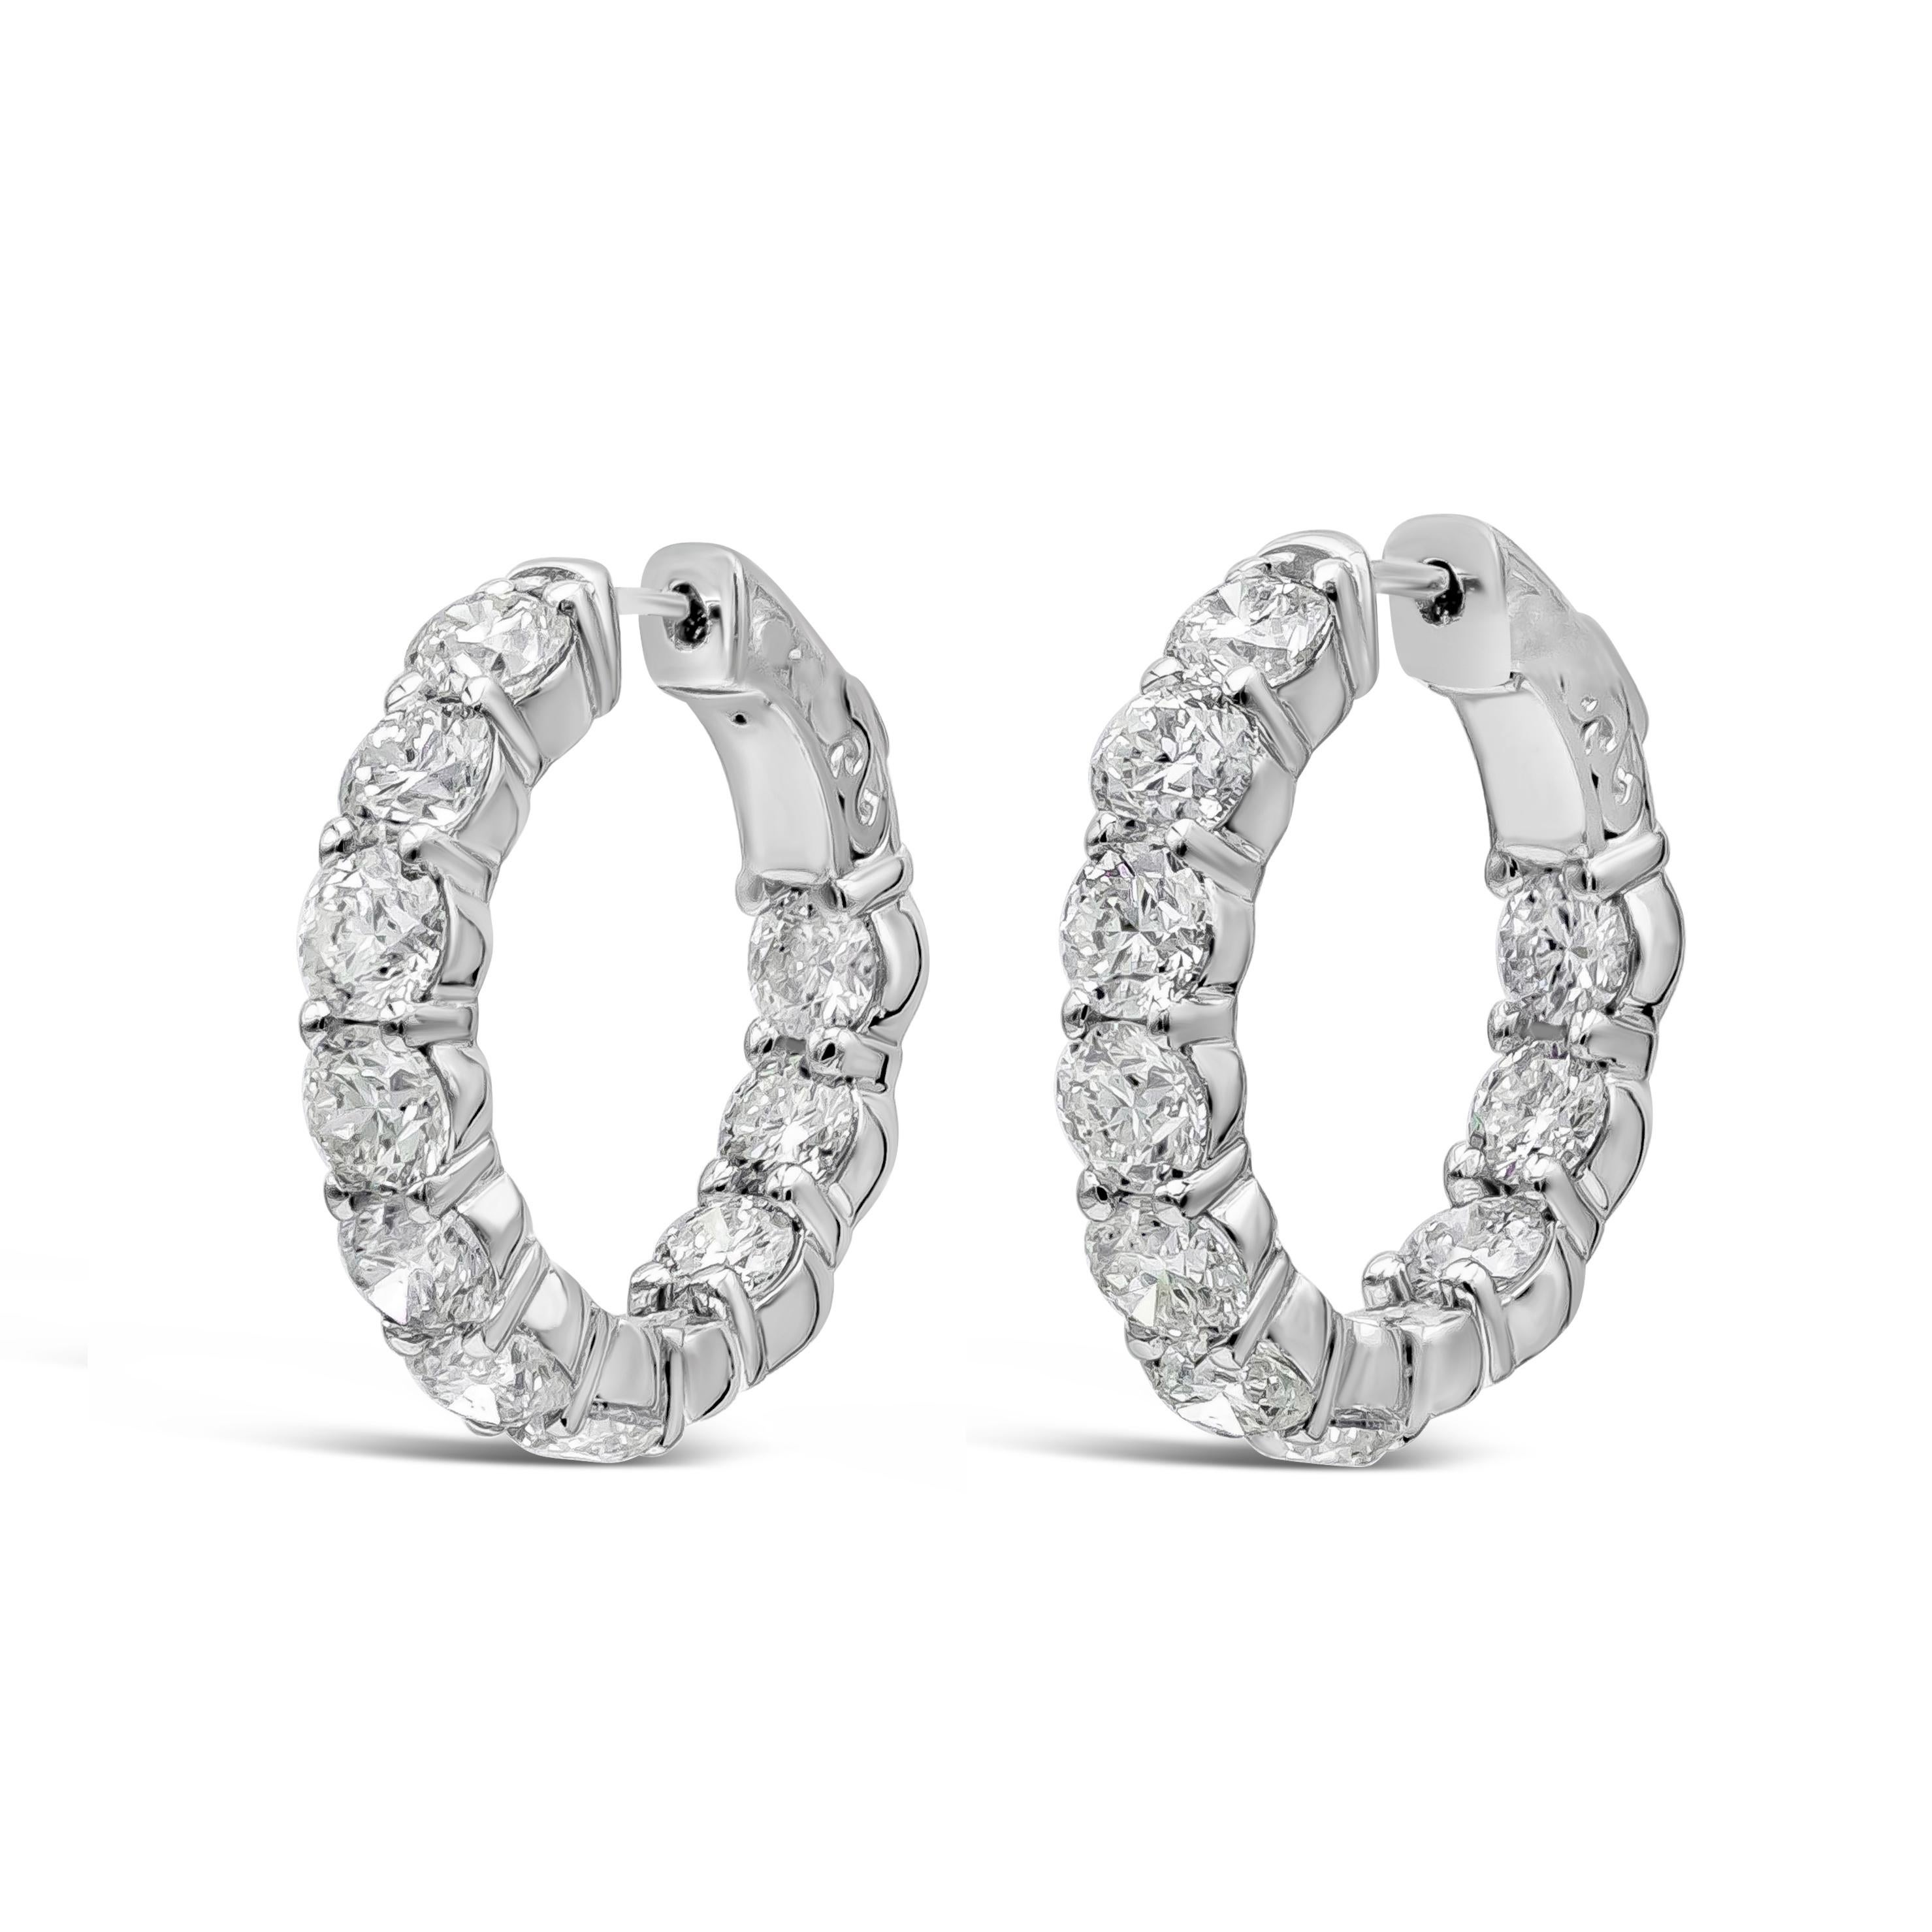 A classic and versatile style hoop earrings showcasing 20 round brilliant diamonds, set in a scalloped pave style made in 14k white gold. Diamonds are 5.35 carats total, H color and SI in clarity. 0.90 inch diameter.

Style available in different